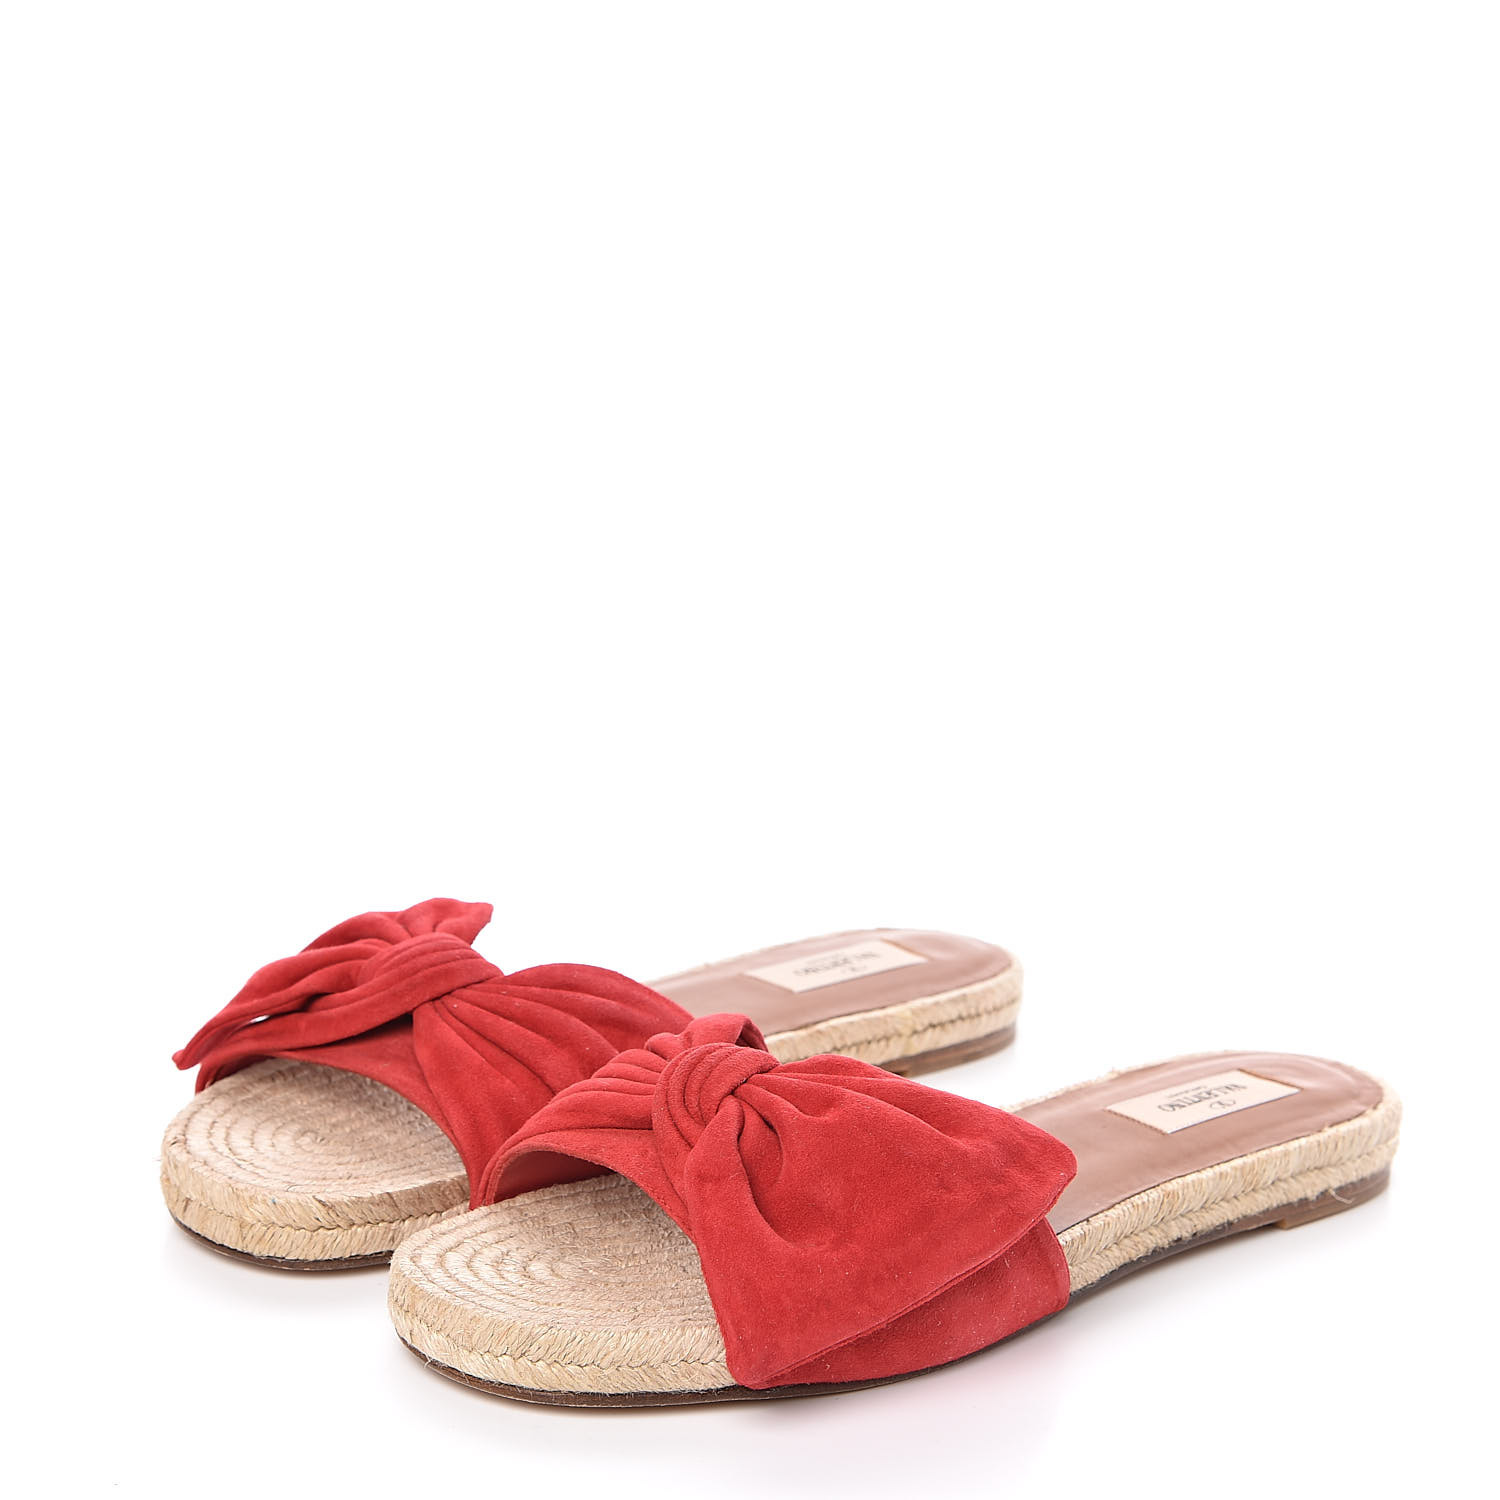 VALENTINO Suede Tropical Bow Espadrille Slide Sandals 41 Red 505668 ...